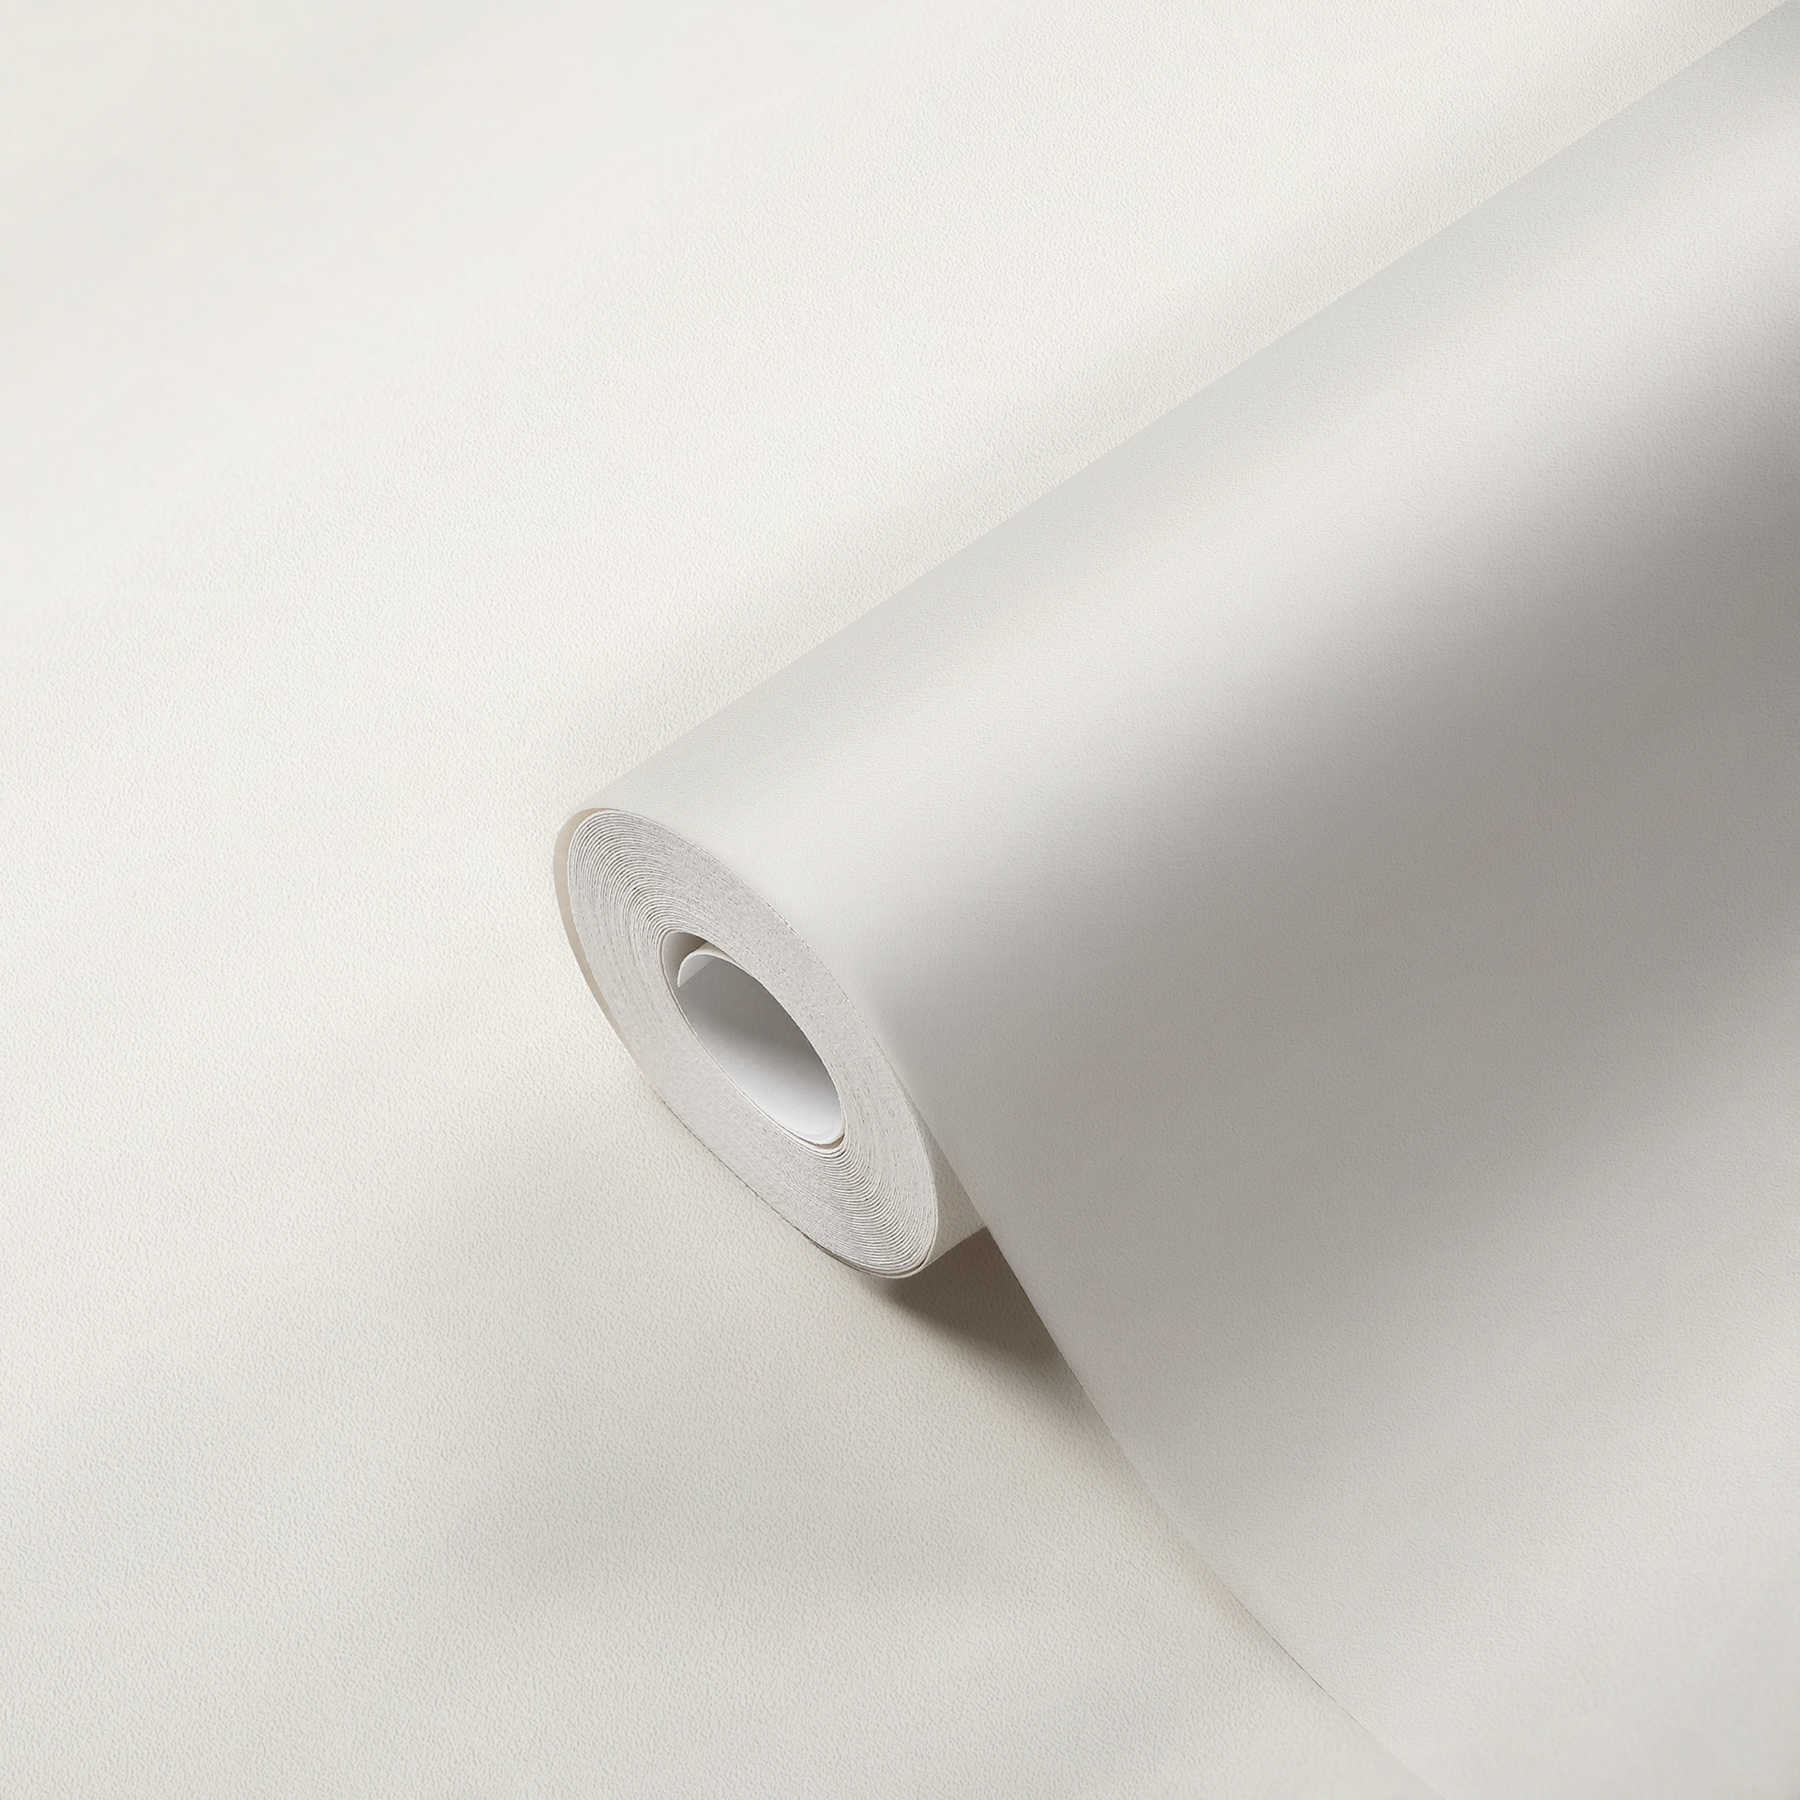             Non-woven wallpaper white, double width large roll 21m
        